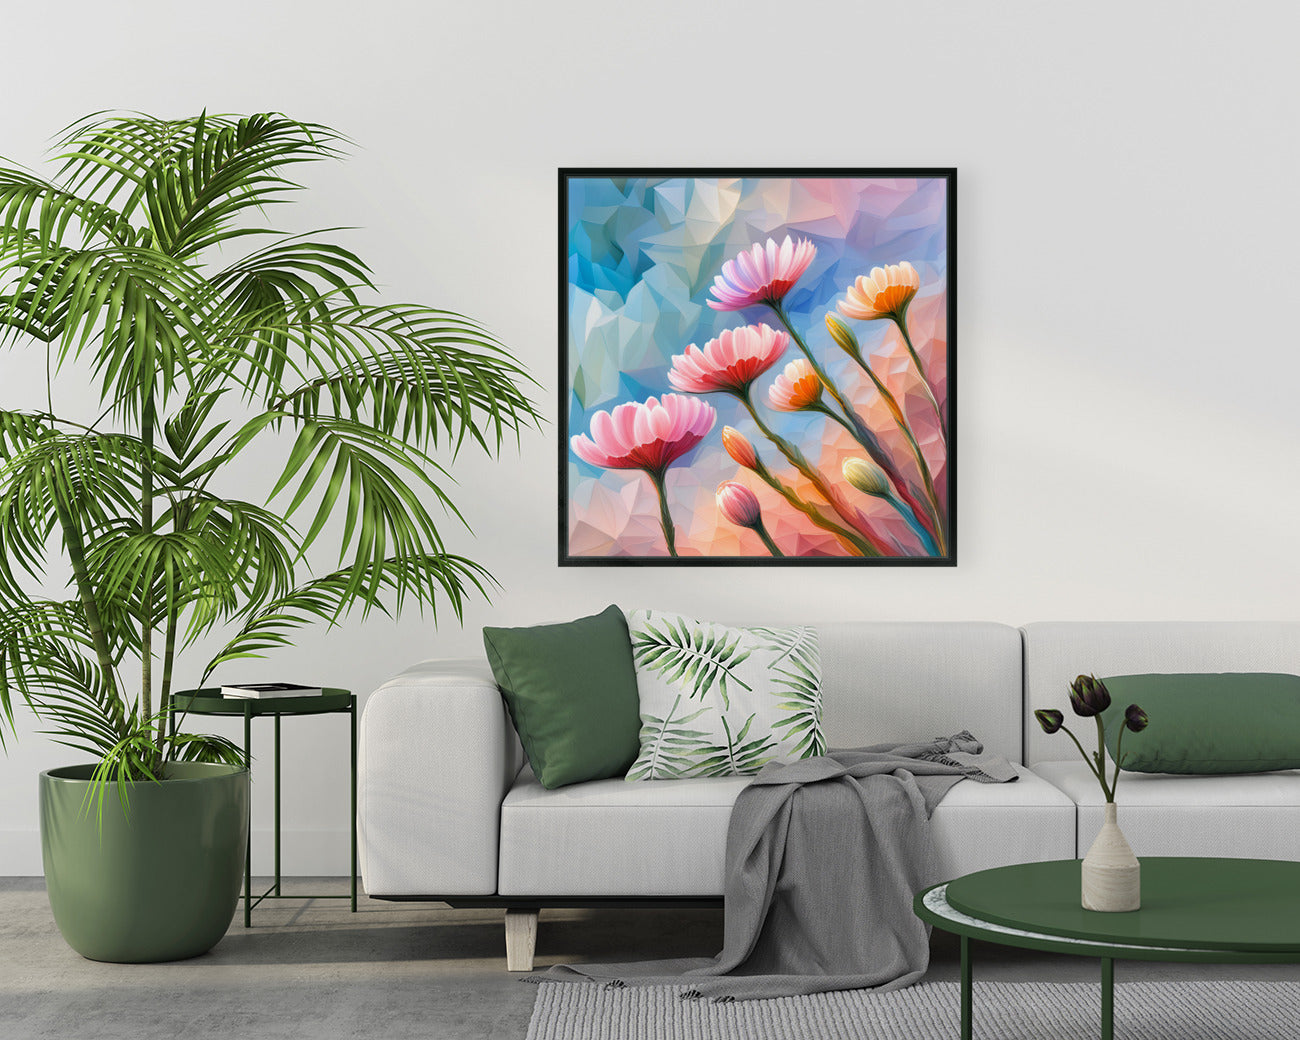 Abstract pastel wall art showcasing a blend of tranquil hues.